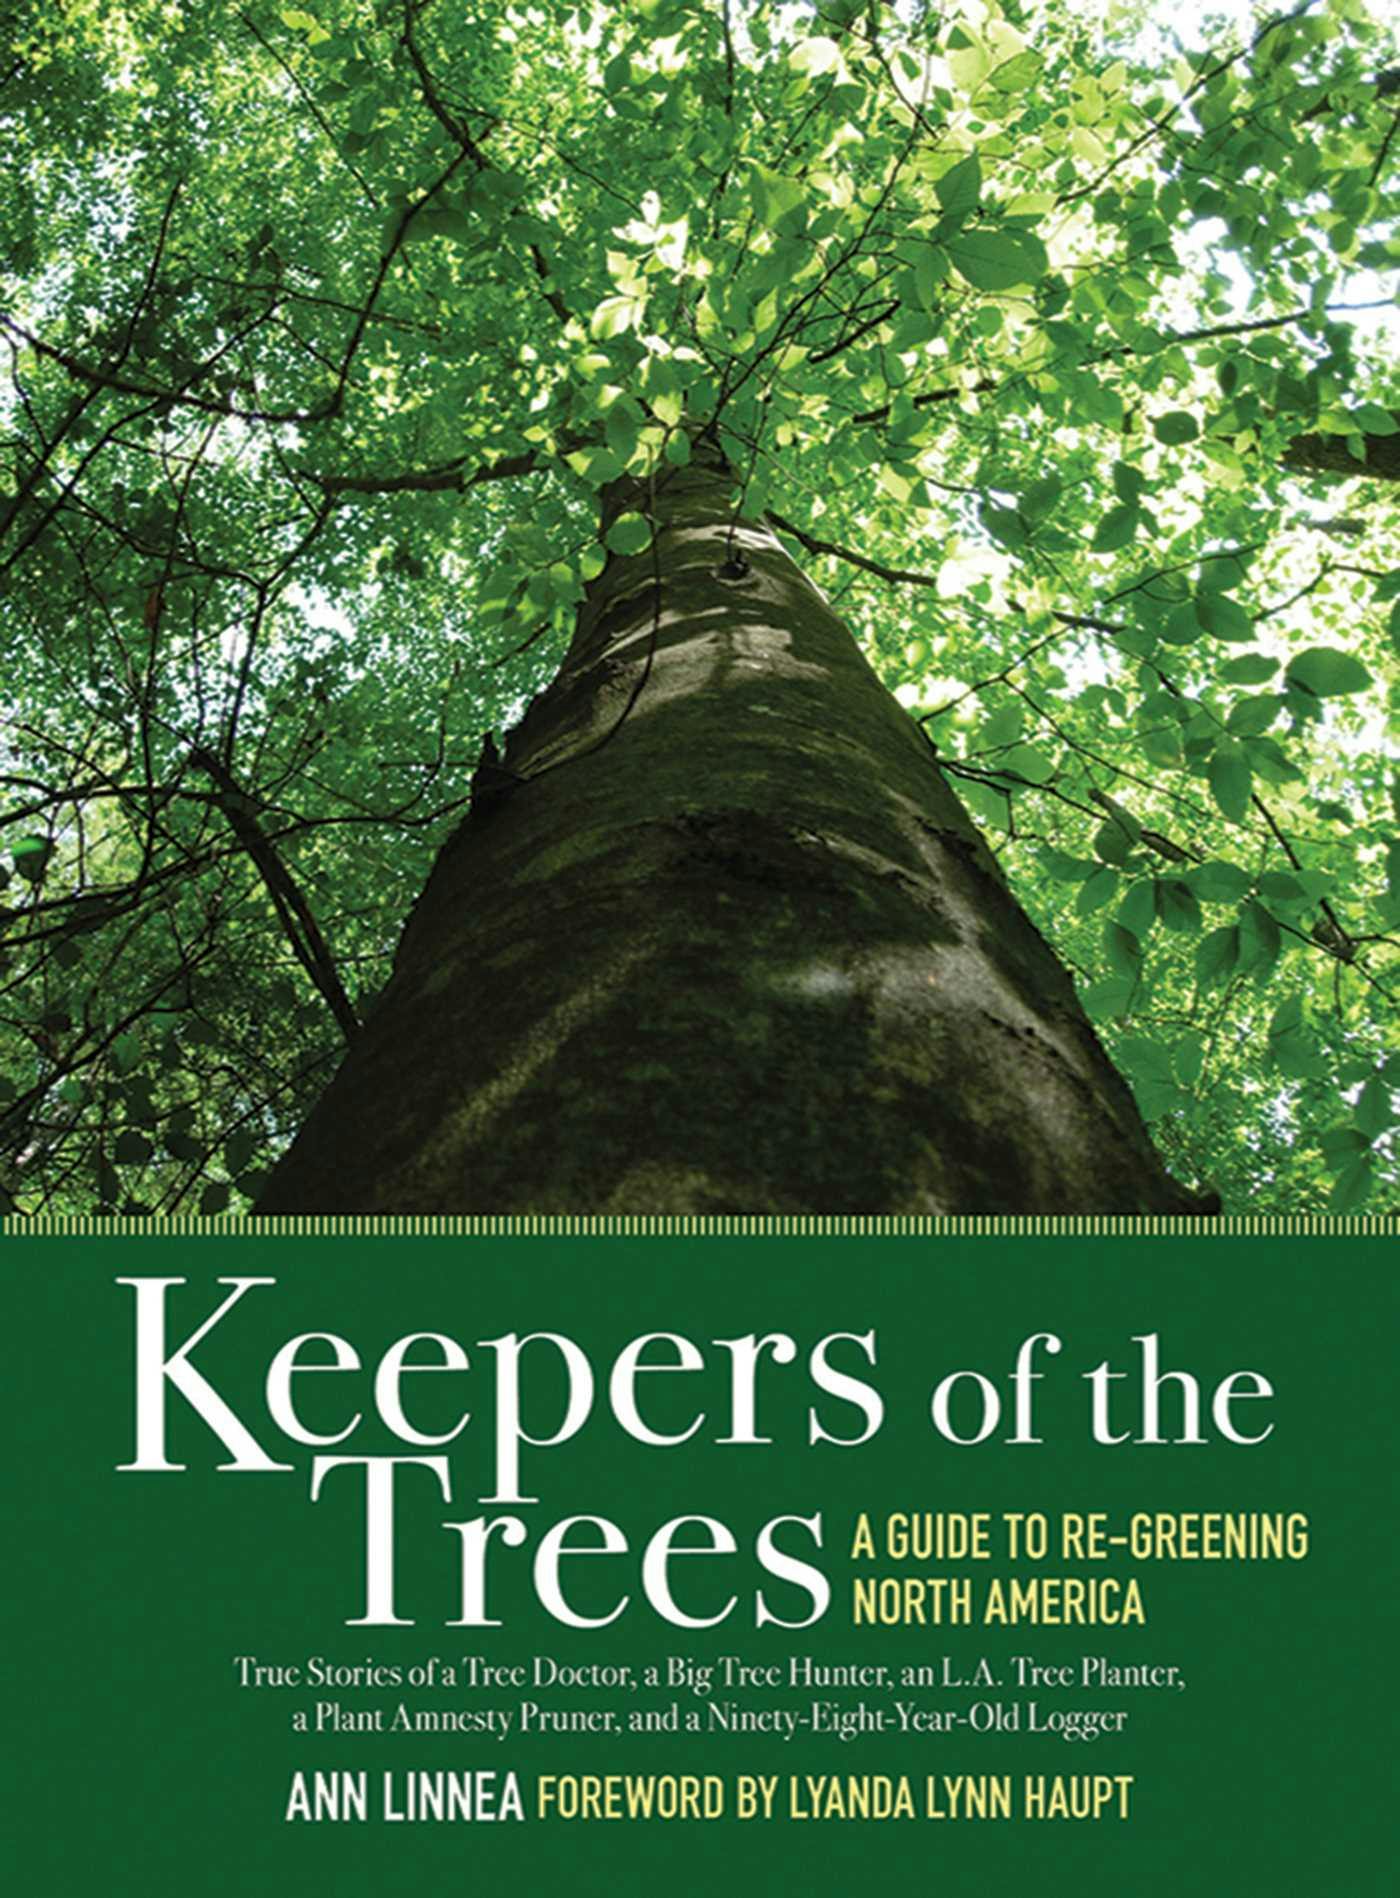 Keepers of the Trees: A Guide to Re-Greening North America - Ann Linnea